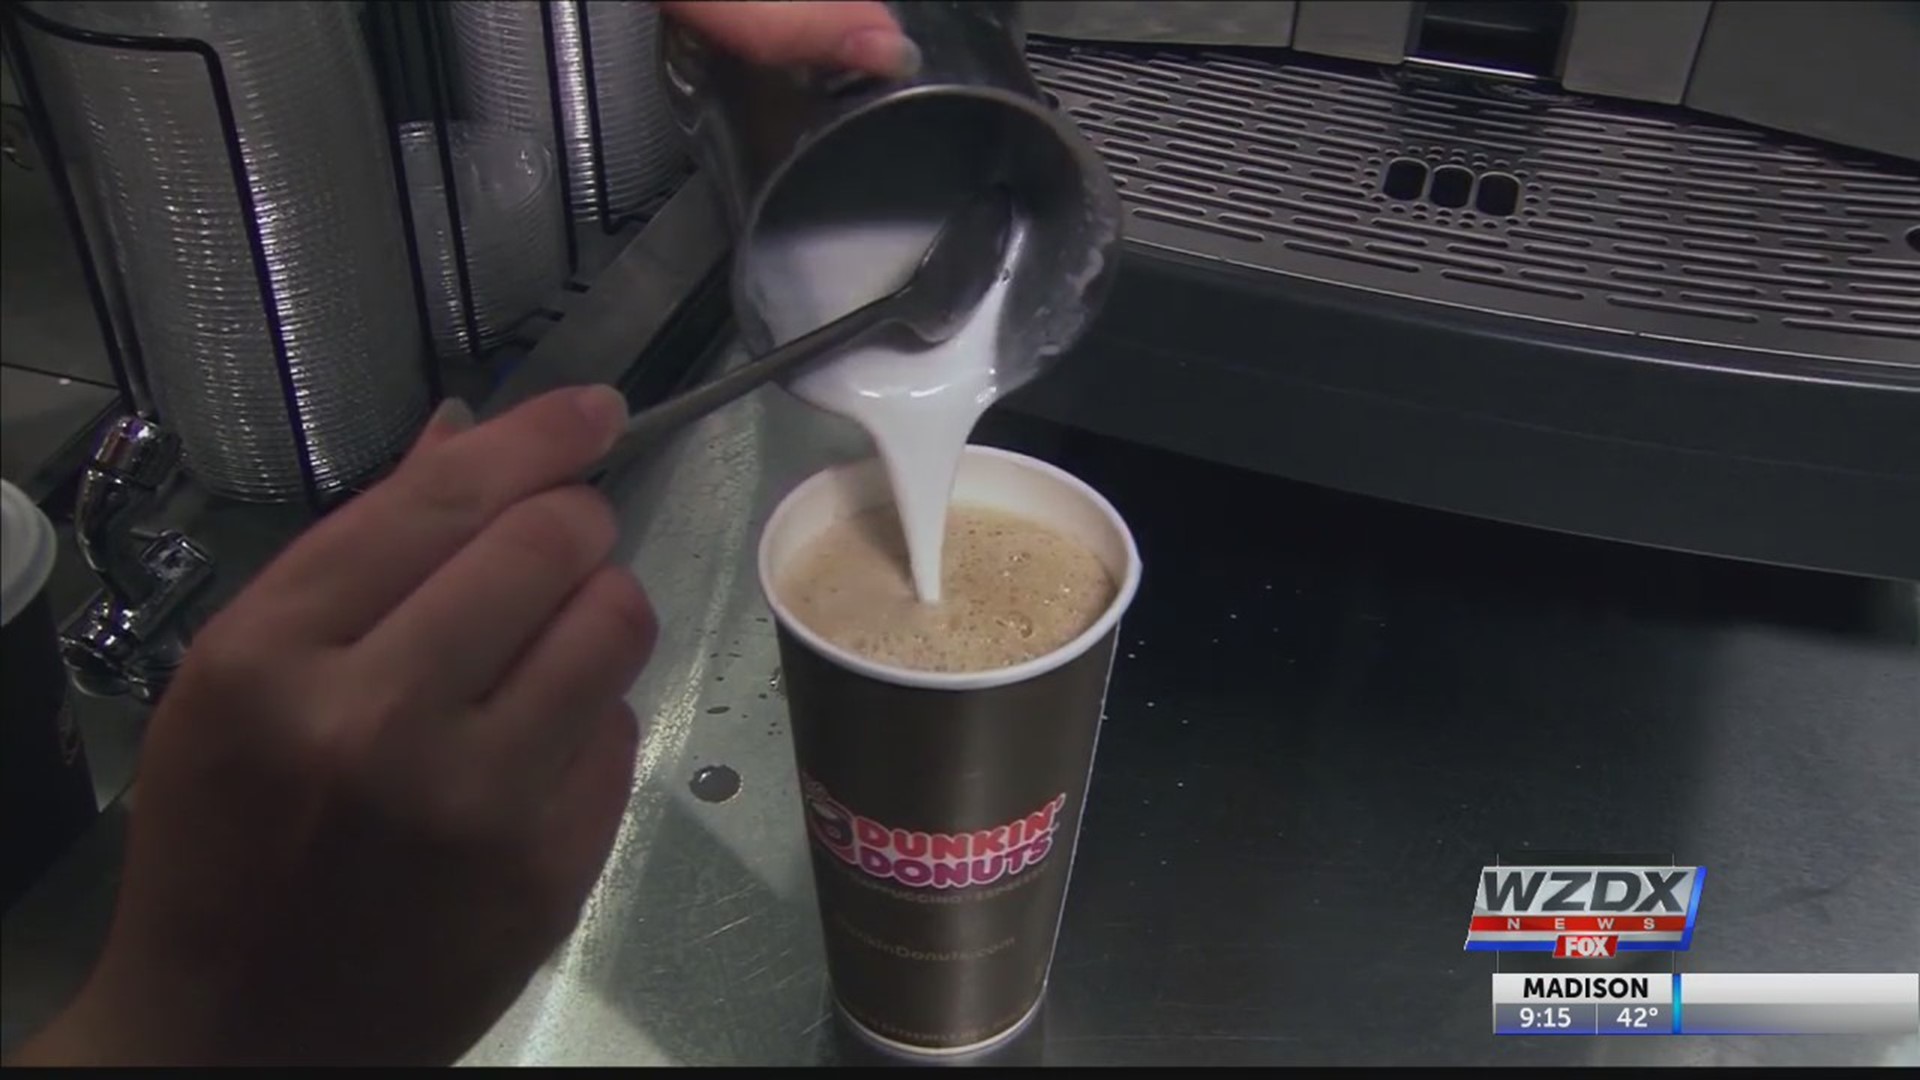 Following a one-year hiatus, Dunkin' announced on social media its peppermint mocha is coming back this holiday season.